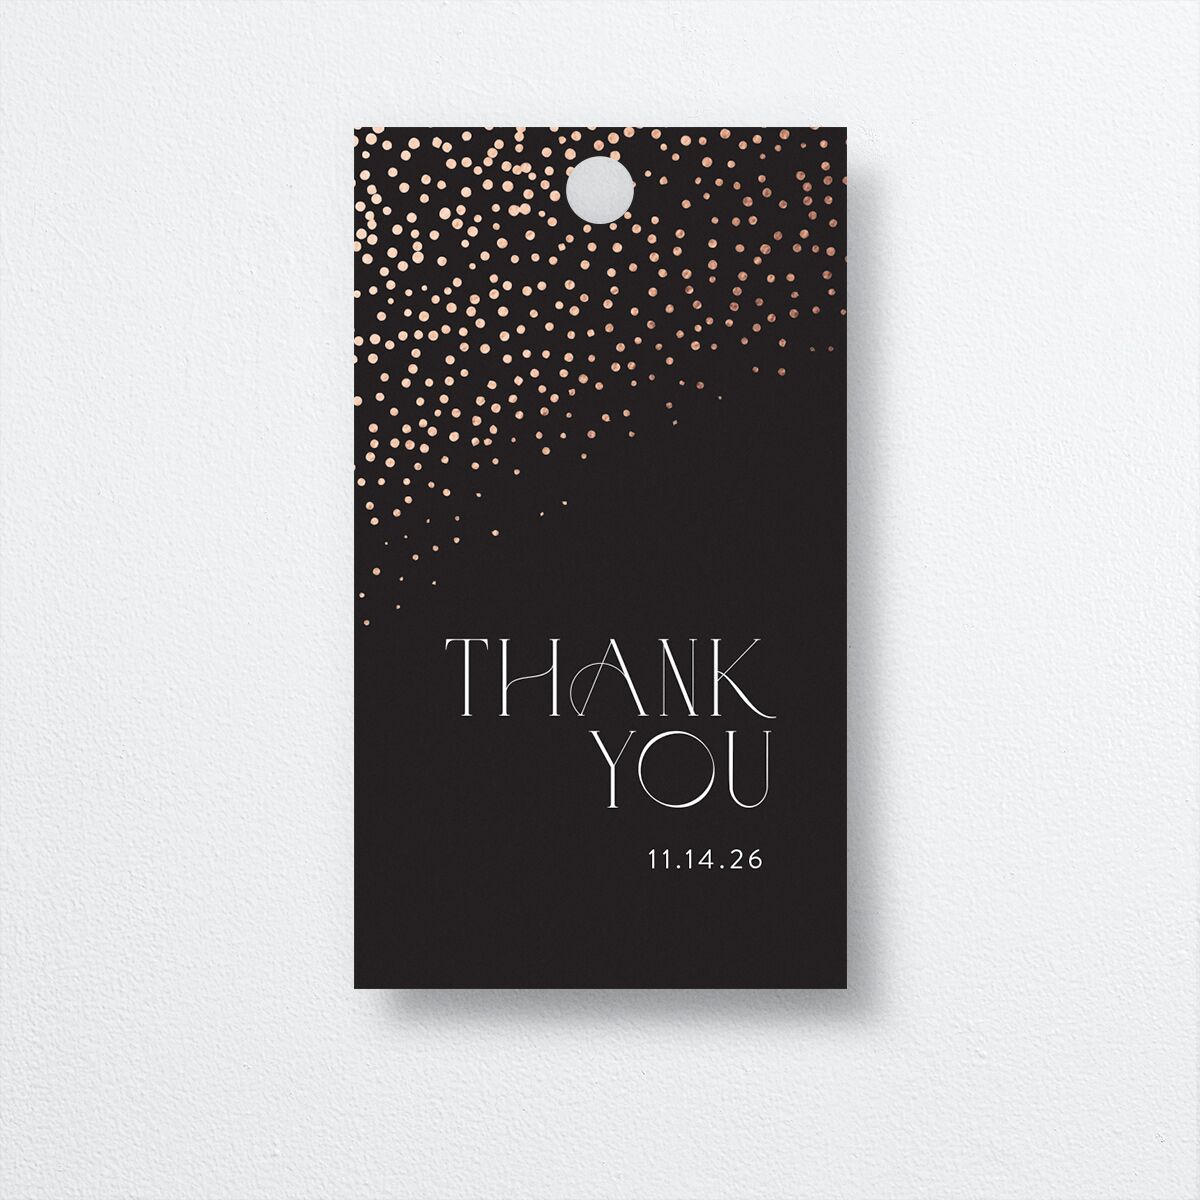 Sweeping Sparkles Favor Gift Tags back